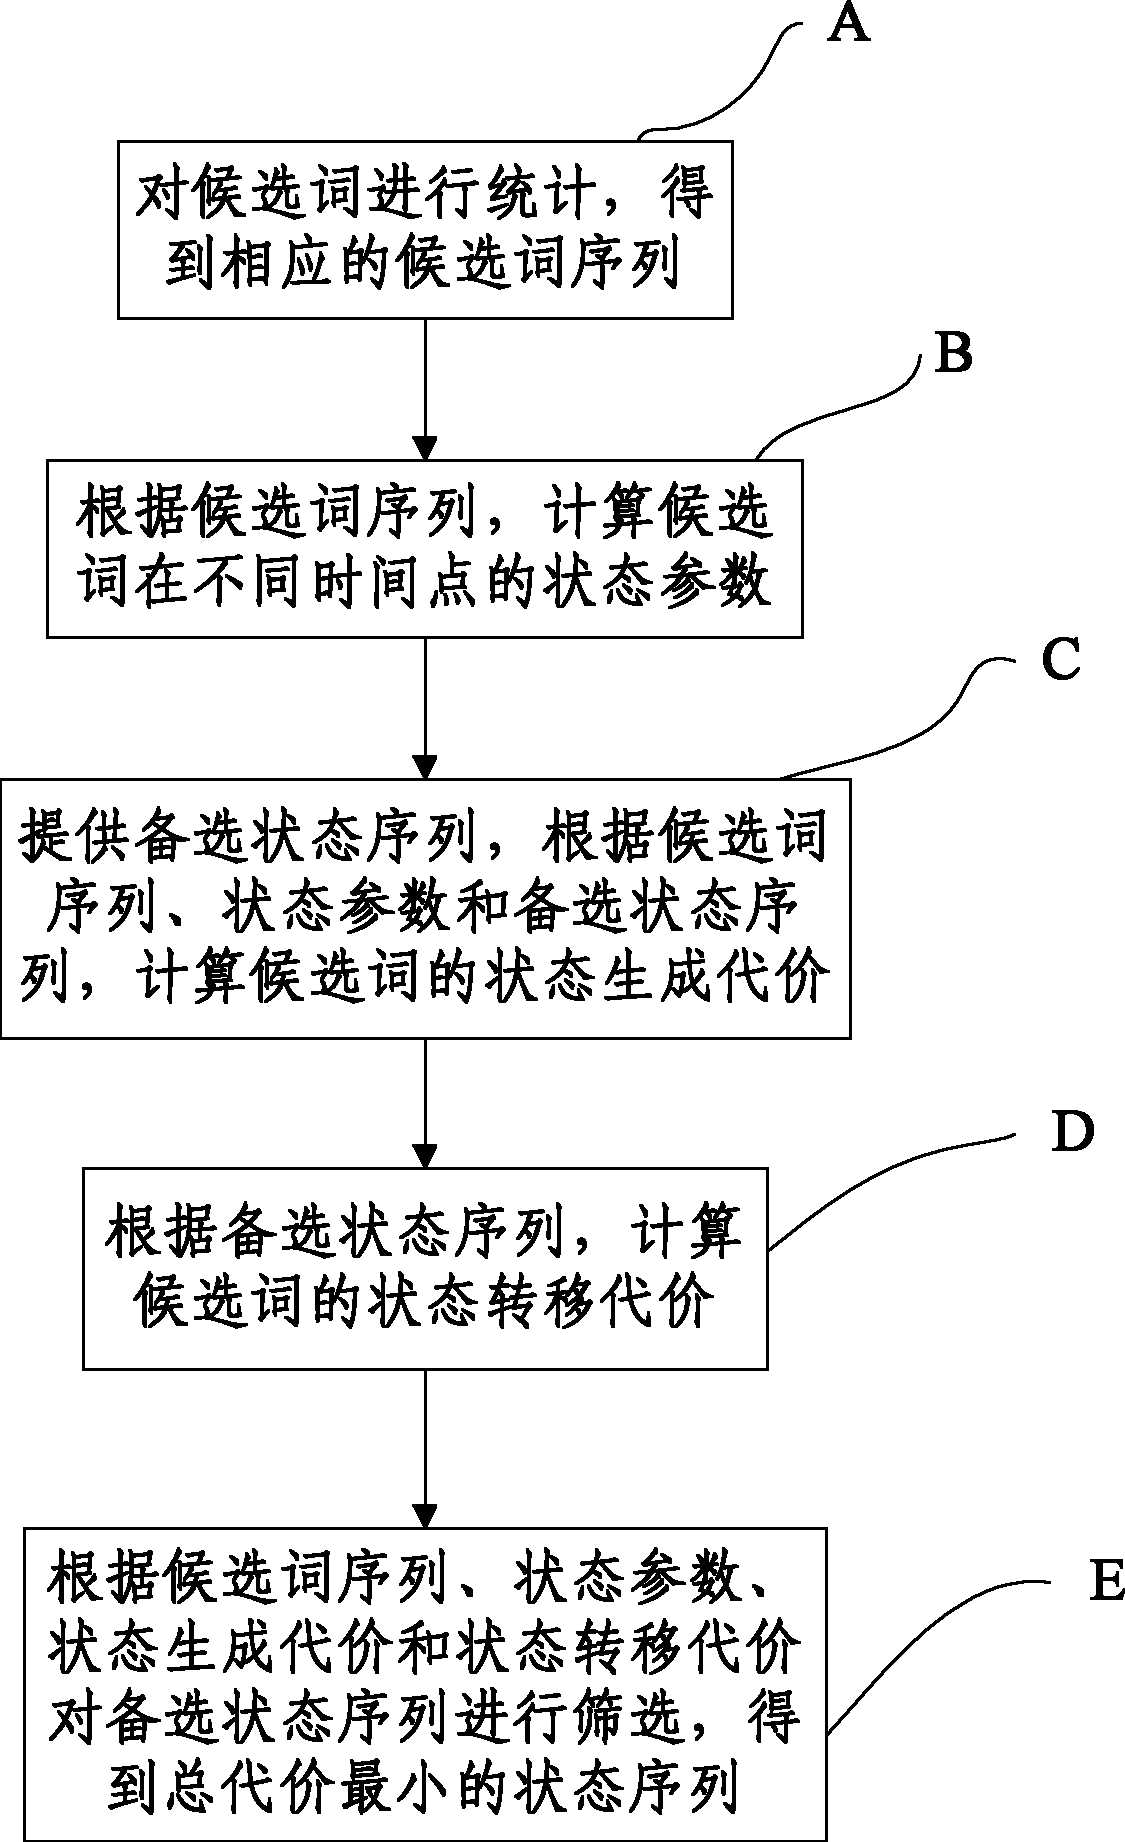 System and method for mining hot words and events in social network